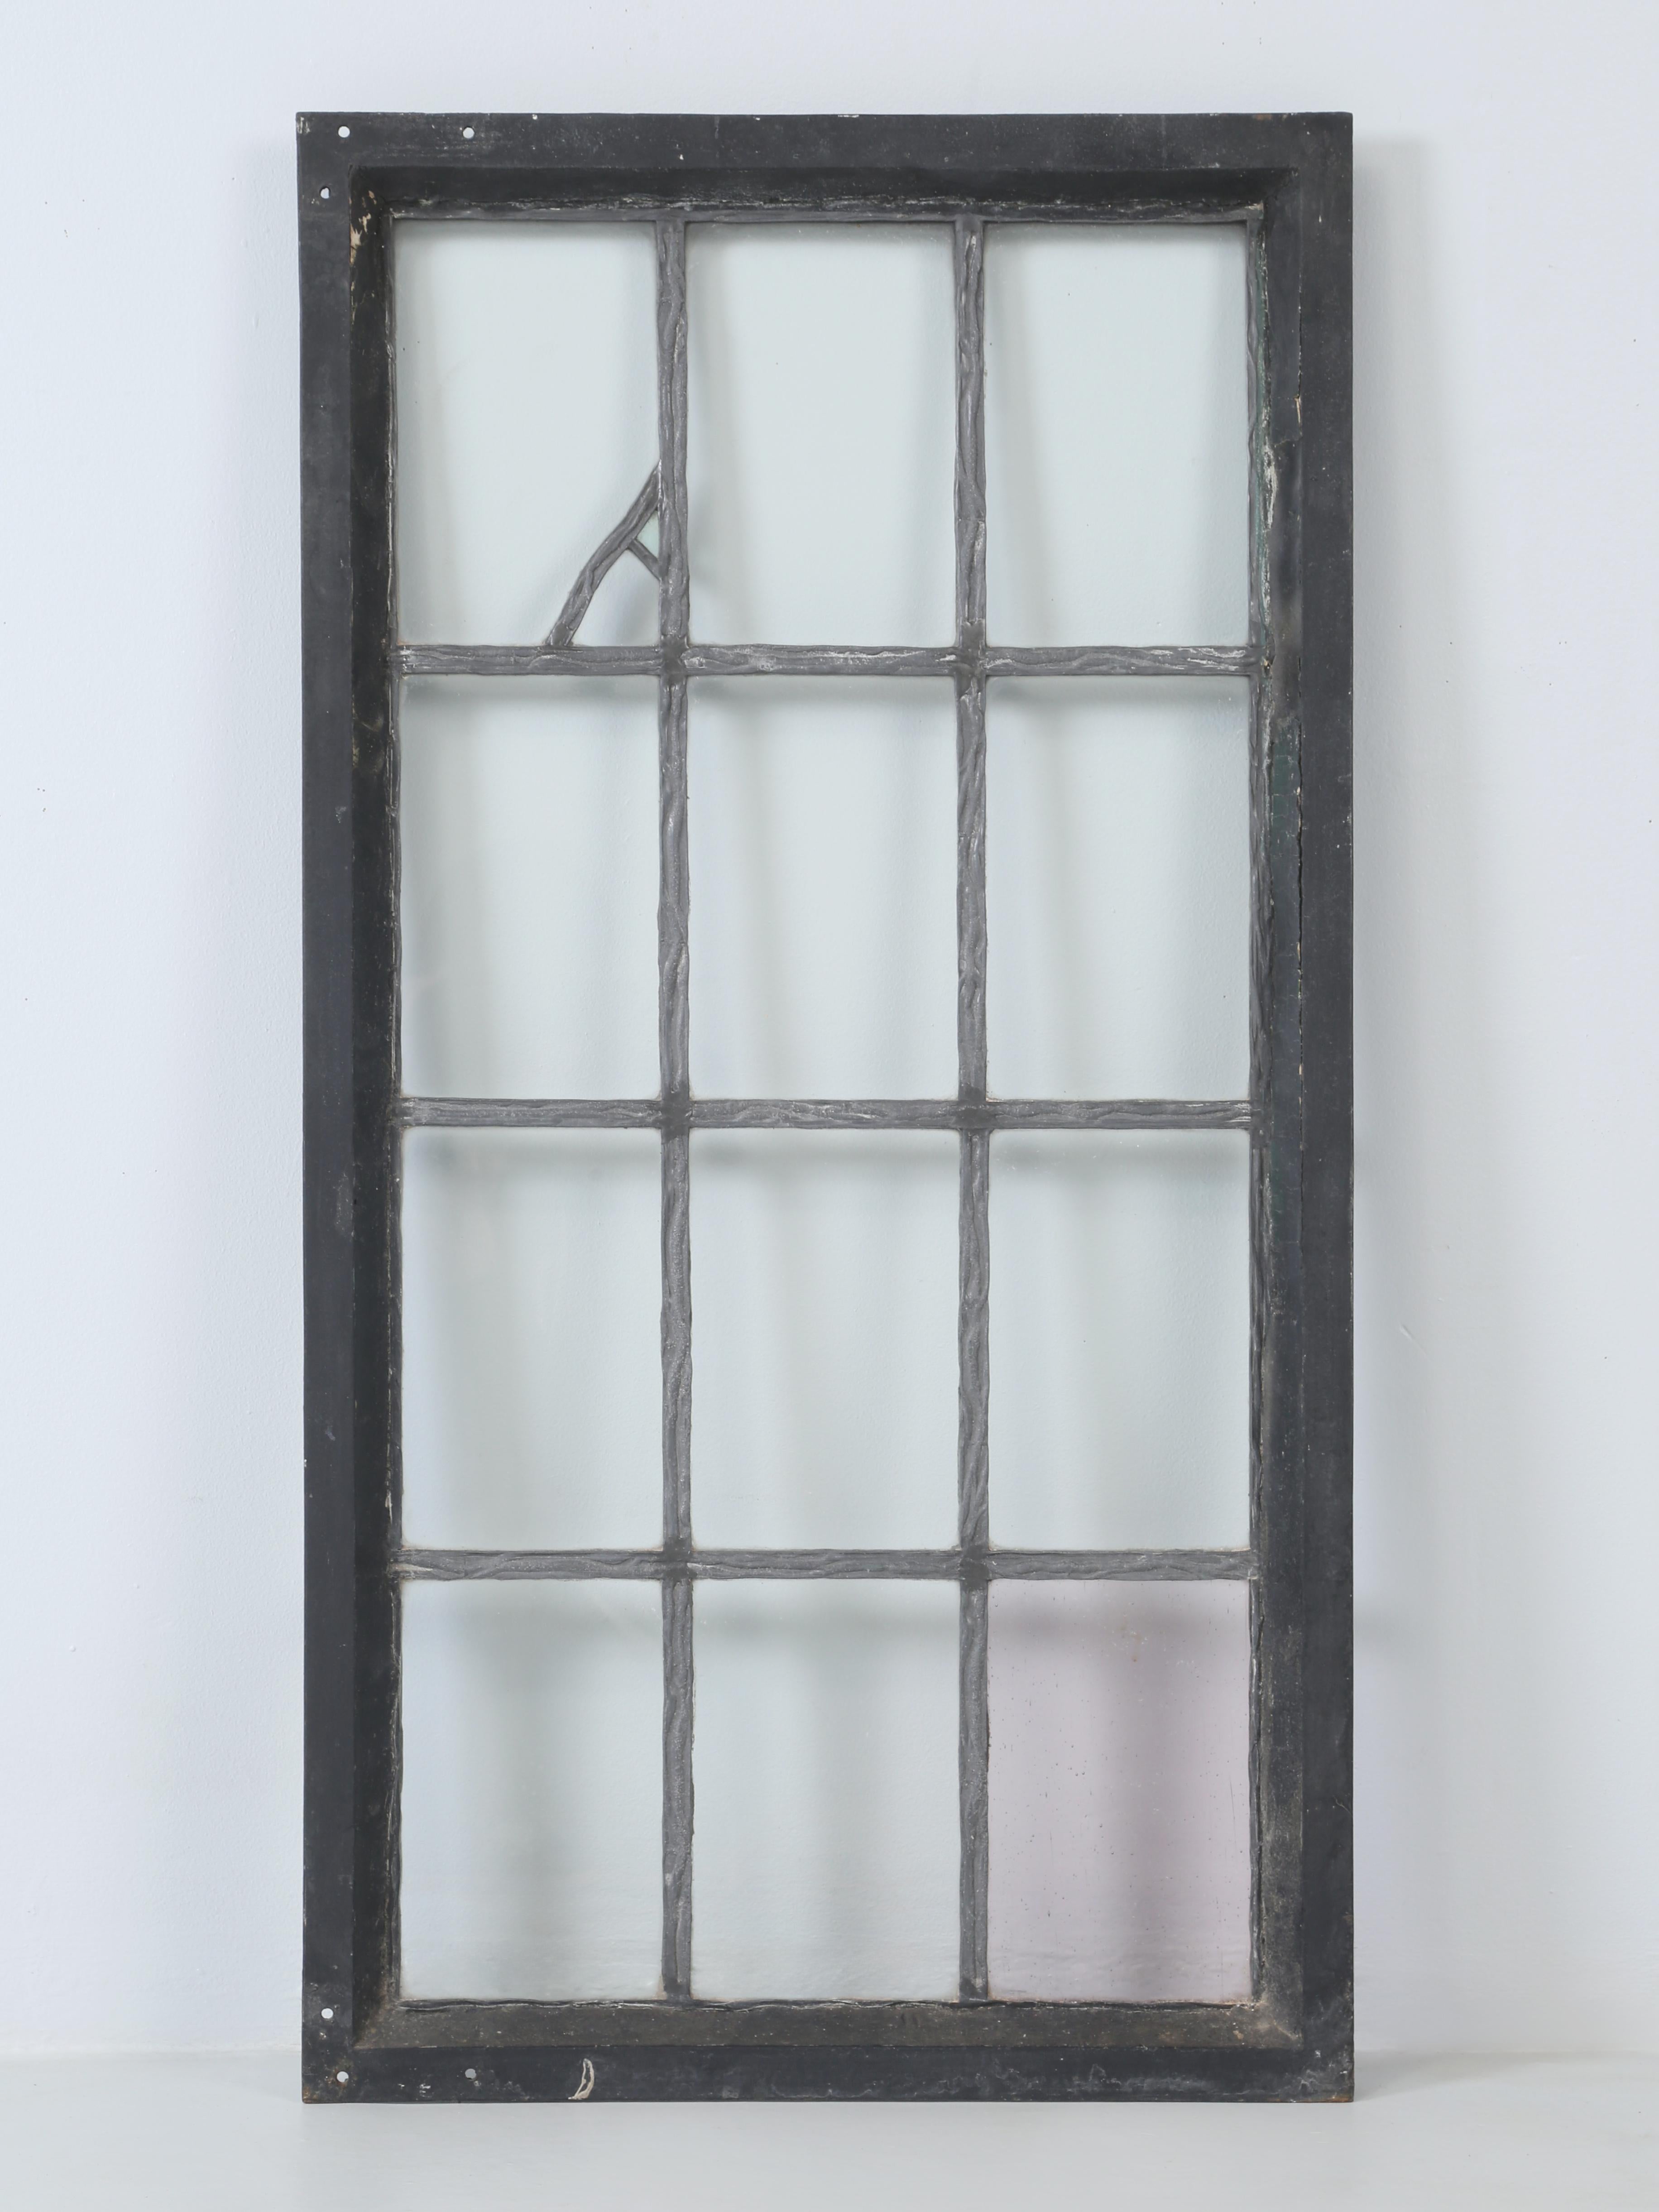 Antique Leaded Glass Window in Original Steel Frame from the 1920's would be our best guess. Appears to be American made and came out of a home in Chicago. There are no visible signs or prior repairs, nor does it require any repairing. Beautifully